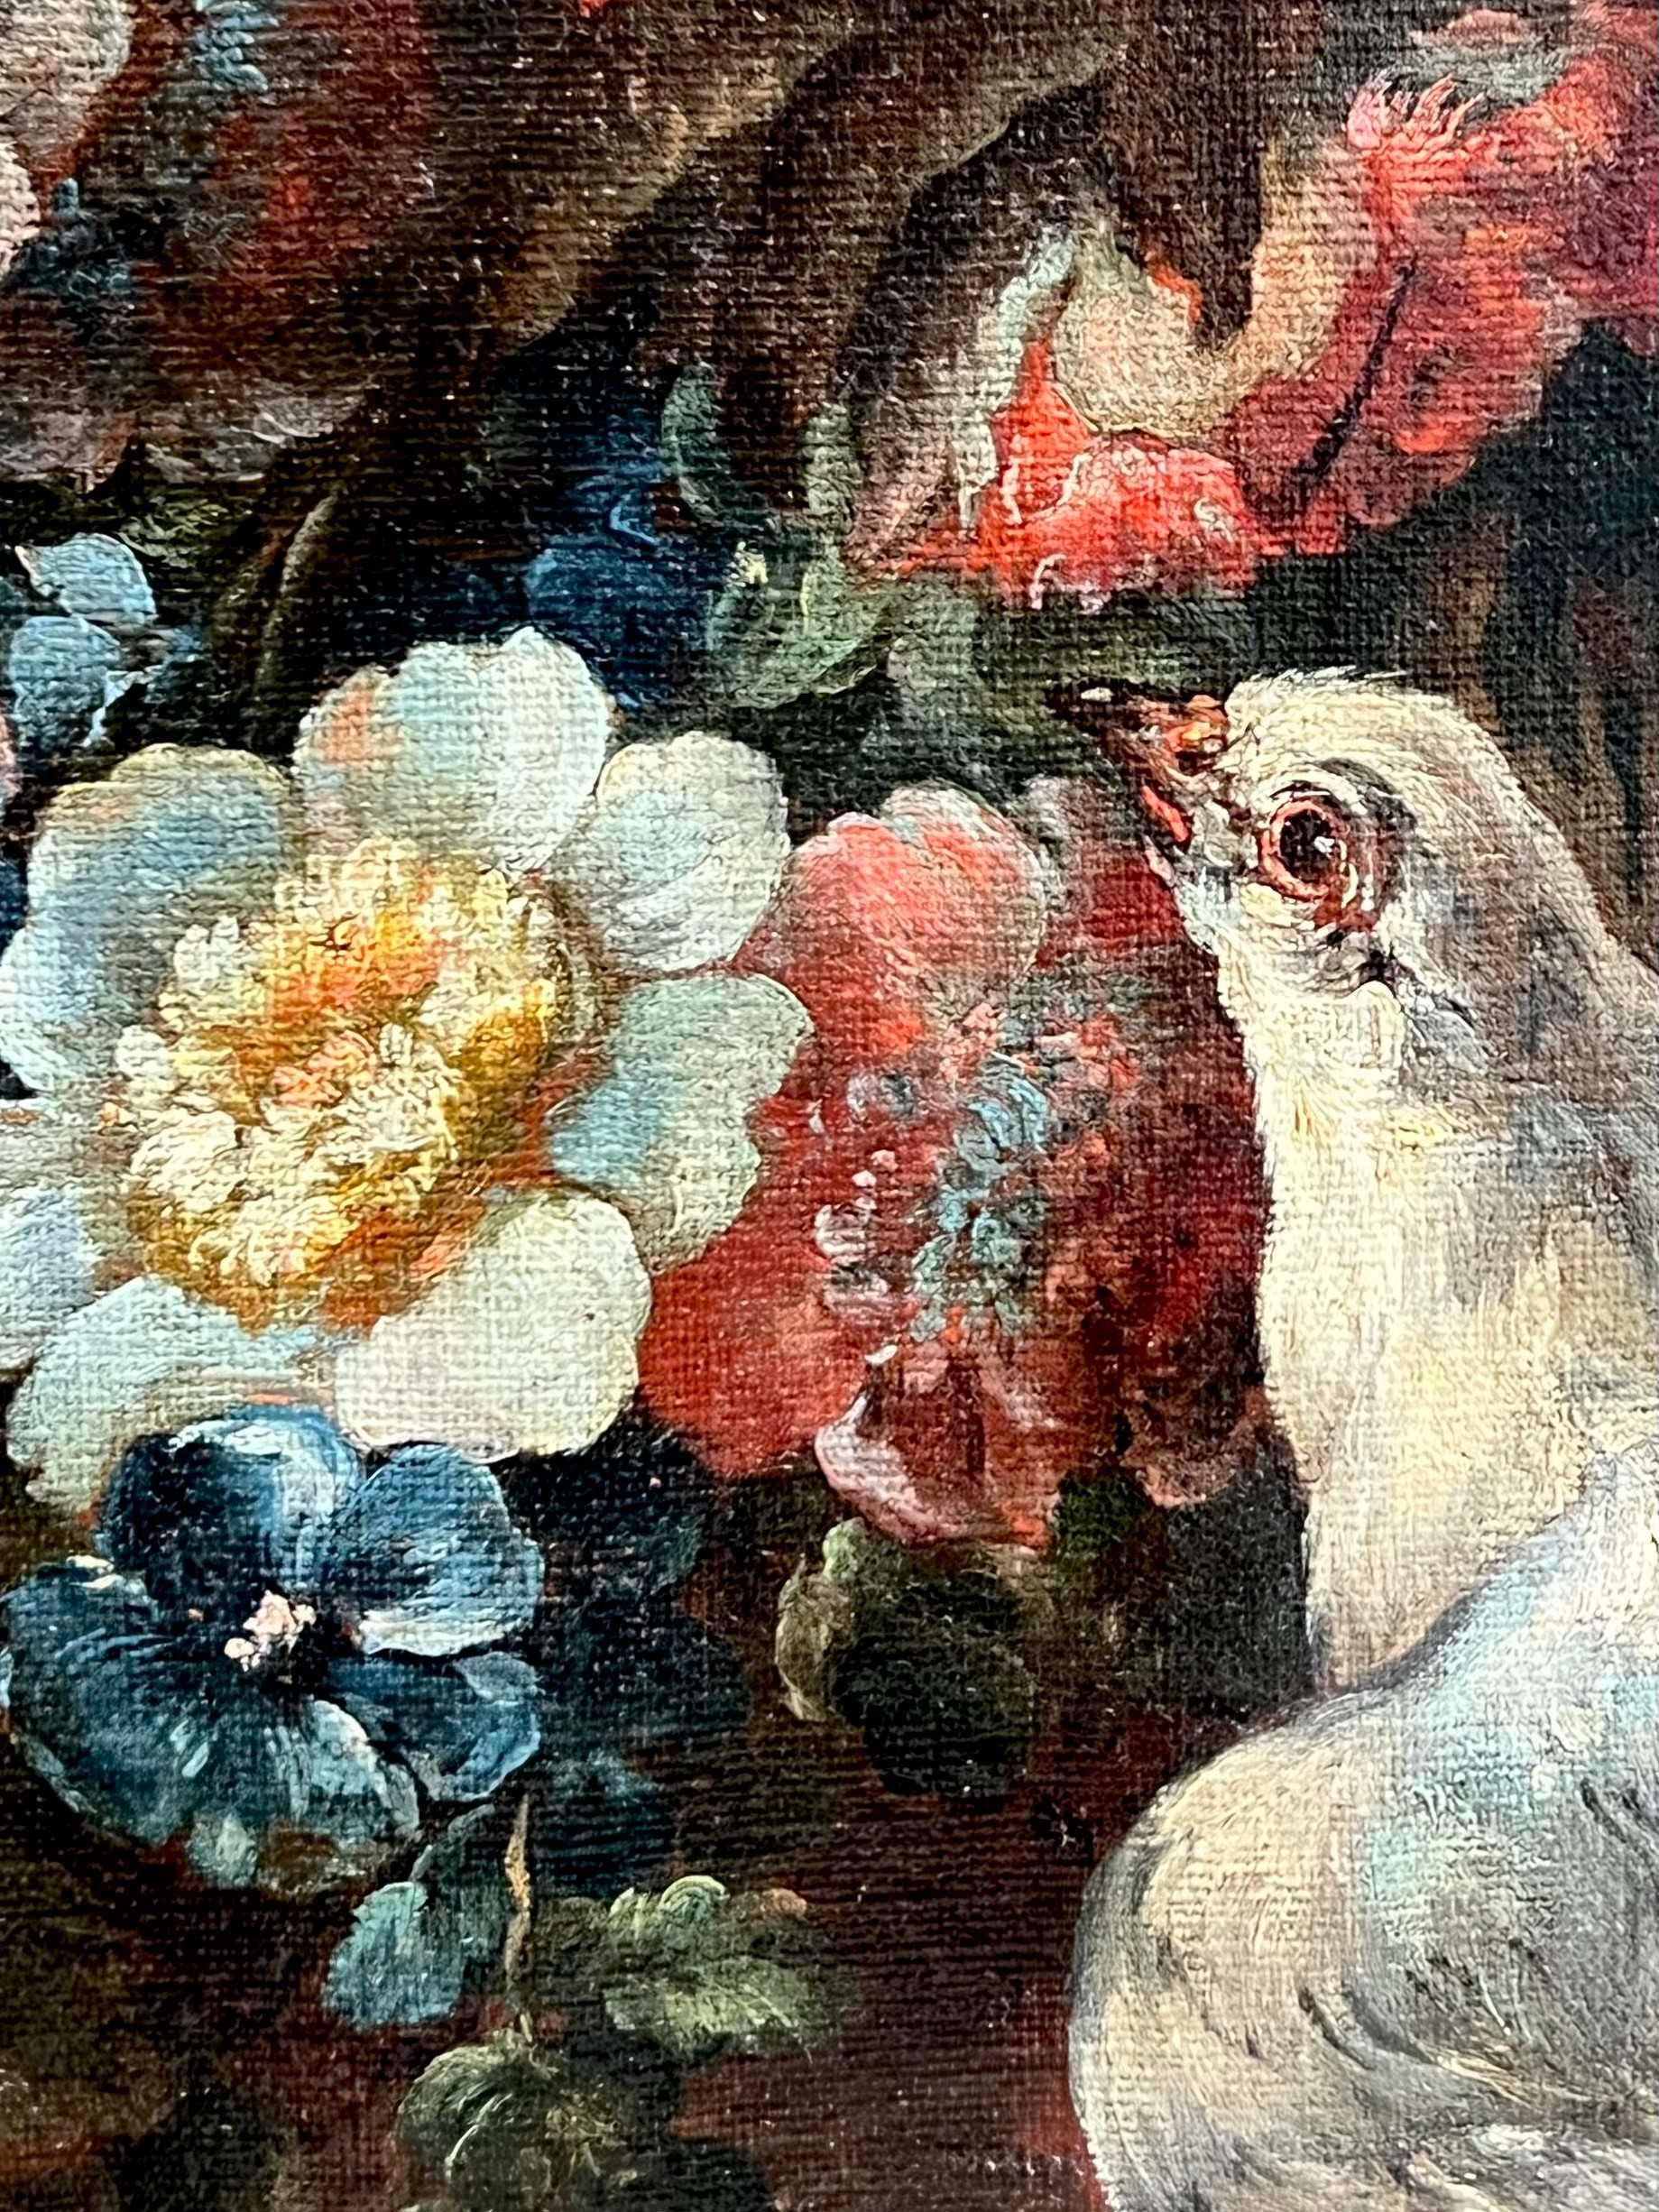 Huge late 17th, early 18th century Italian Old master - A peacock doves and a duck holding flowers in a park landscape at sunset, attr. Angelo Maria Crivelli

In a peaceful park landscape, a majestic peacock is sitting on a vibrant bouquet of fresh